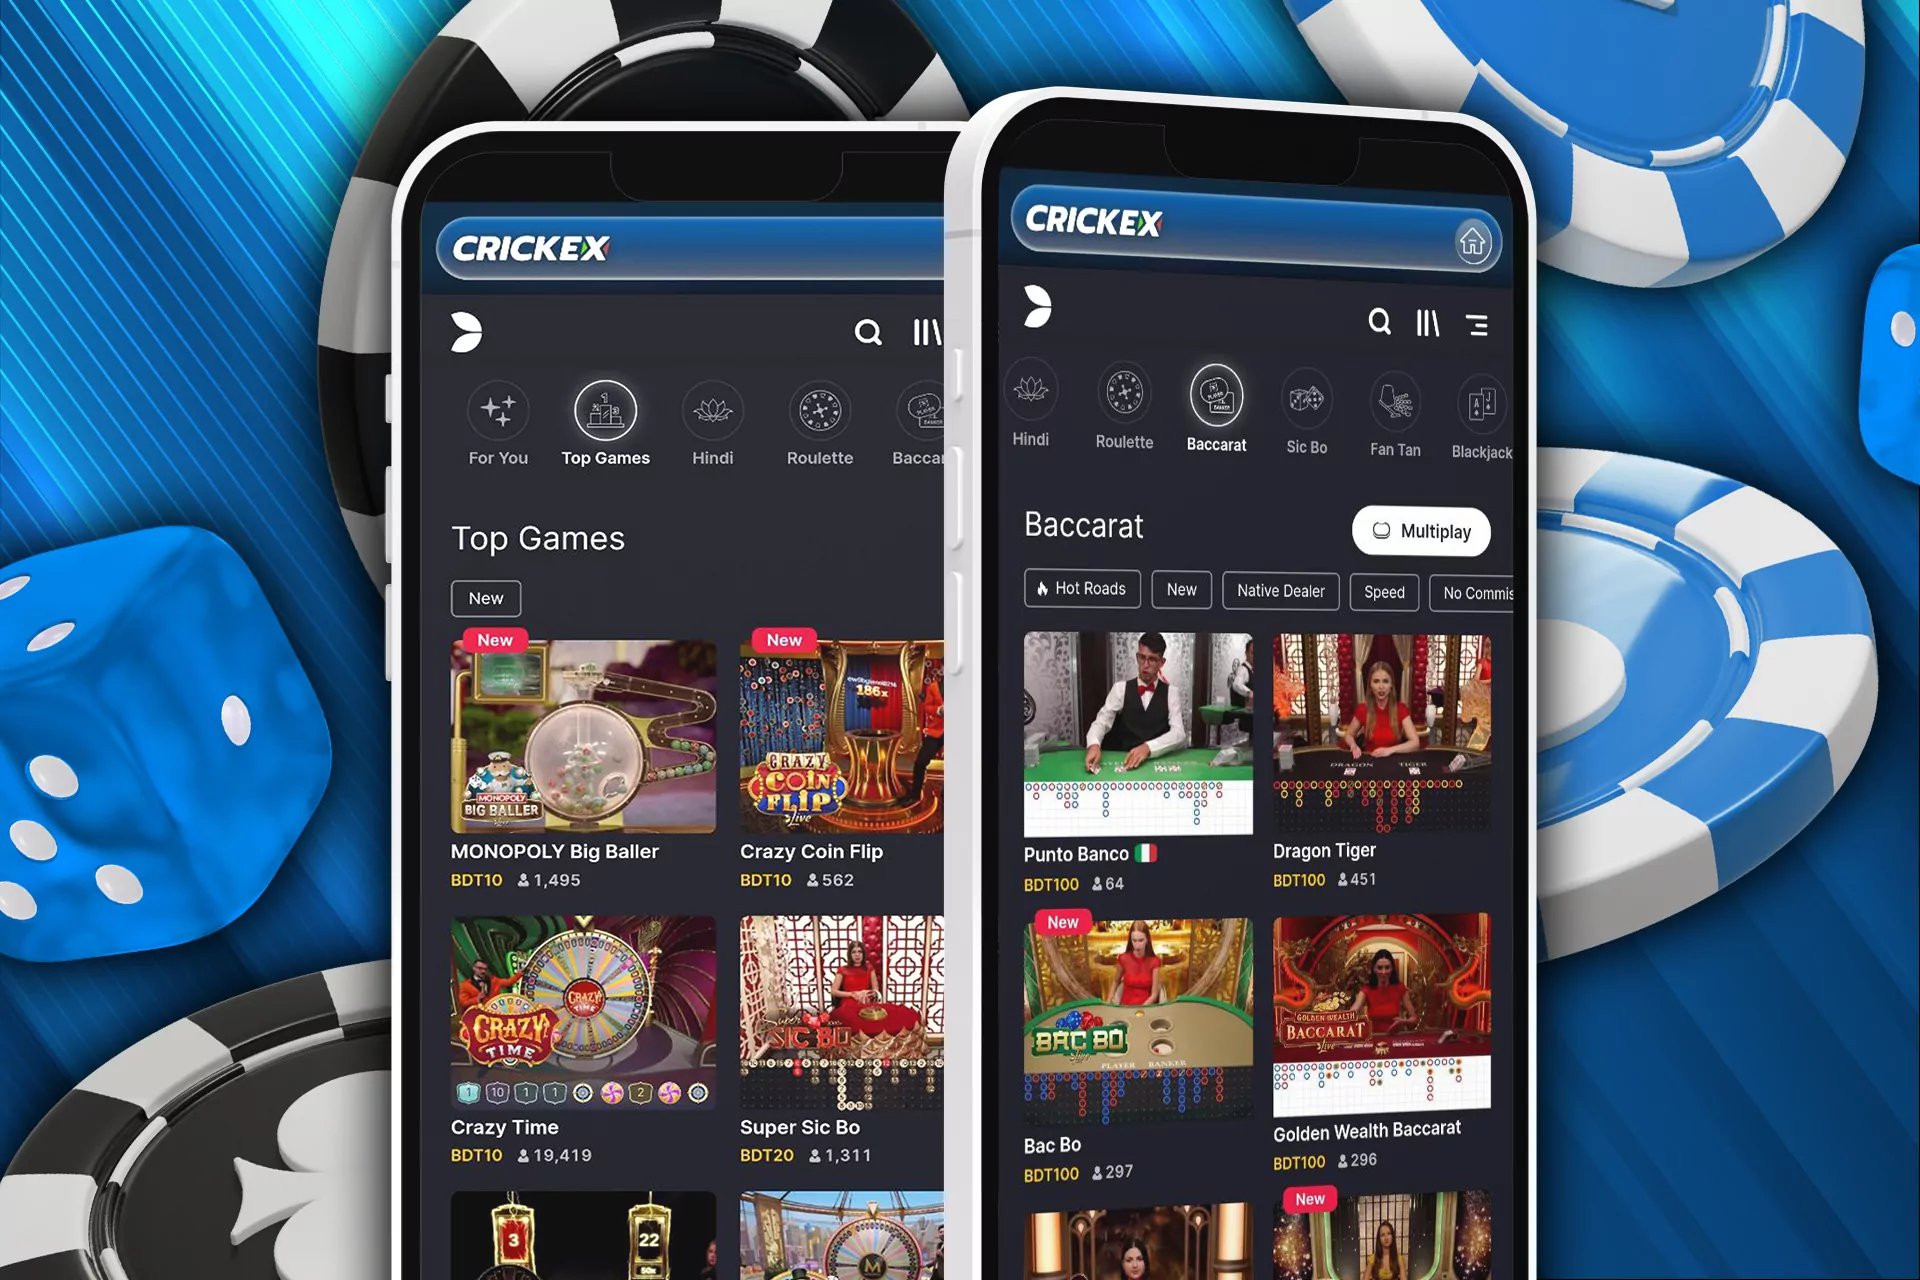 You will find all the popular games such as poker, roulette, blackjack in the Crickex mobile app.